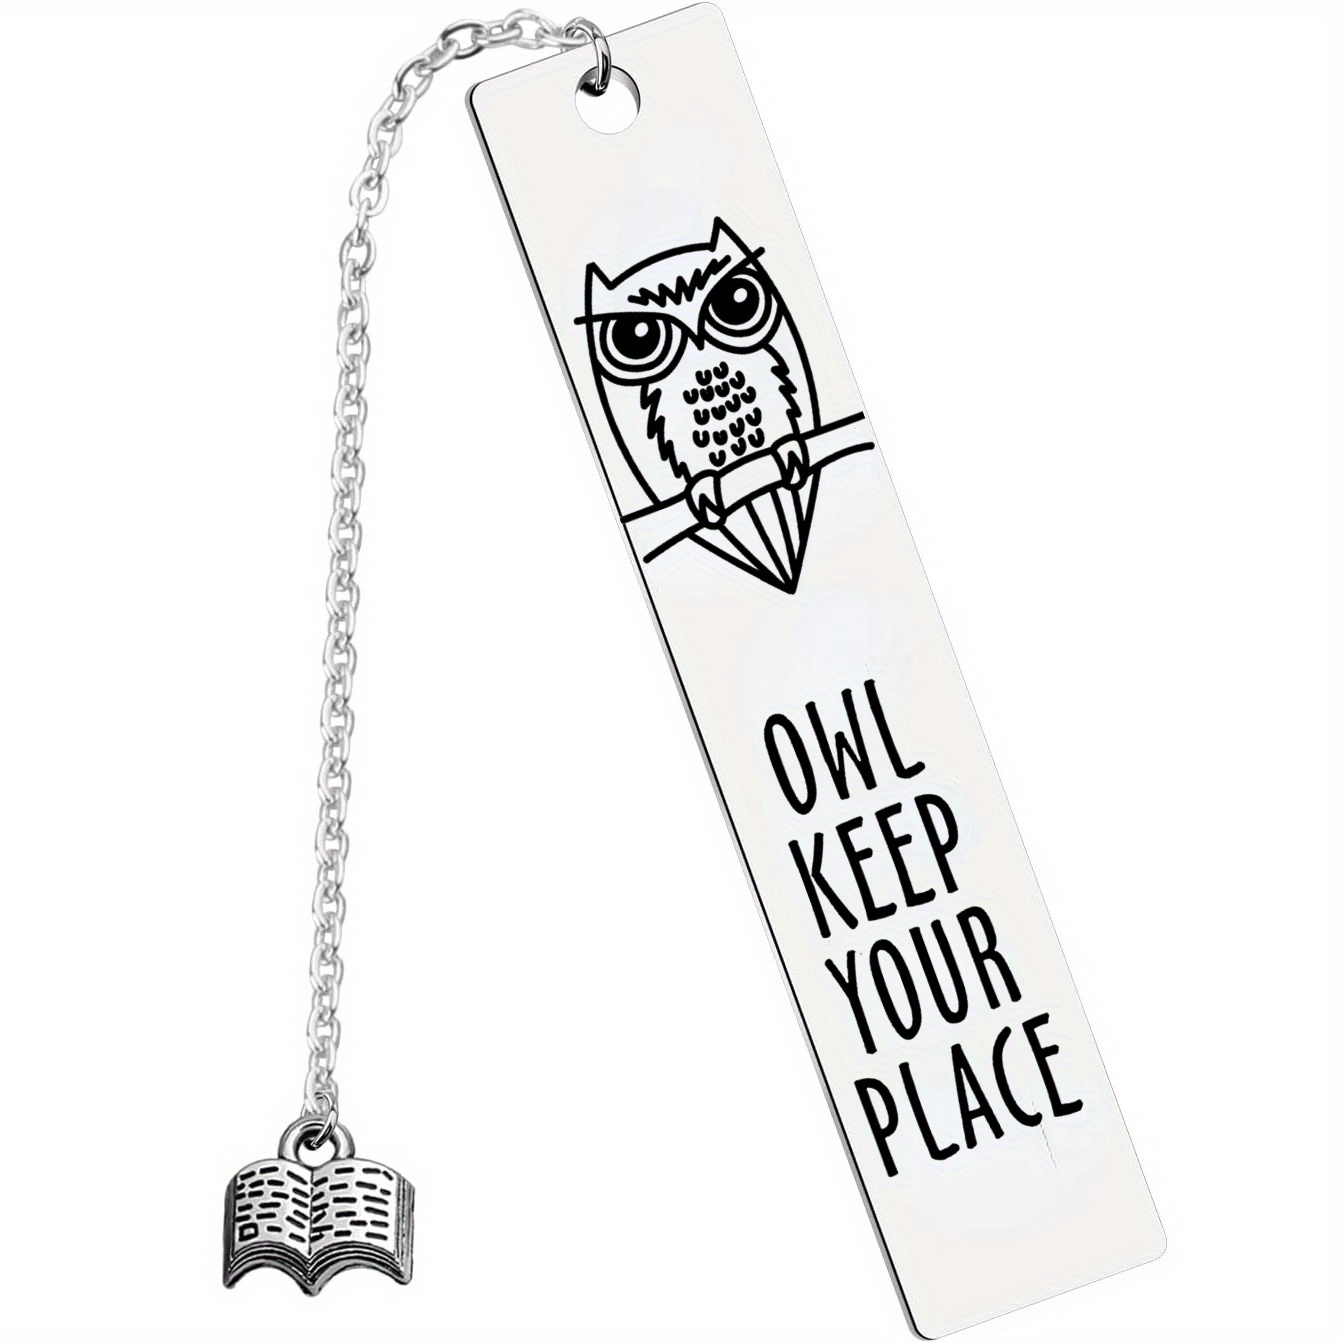 

Owl Keep Your Place Bookmark Back To School, School Supplies, School, Aesthetic School Supplies, Stationary